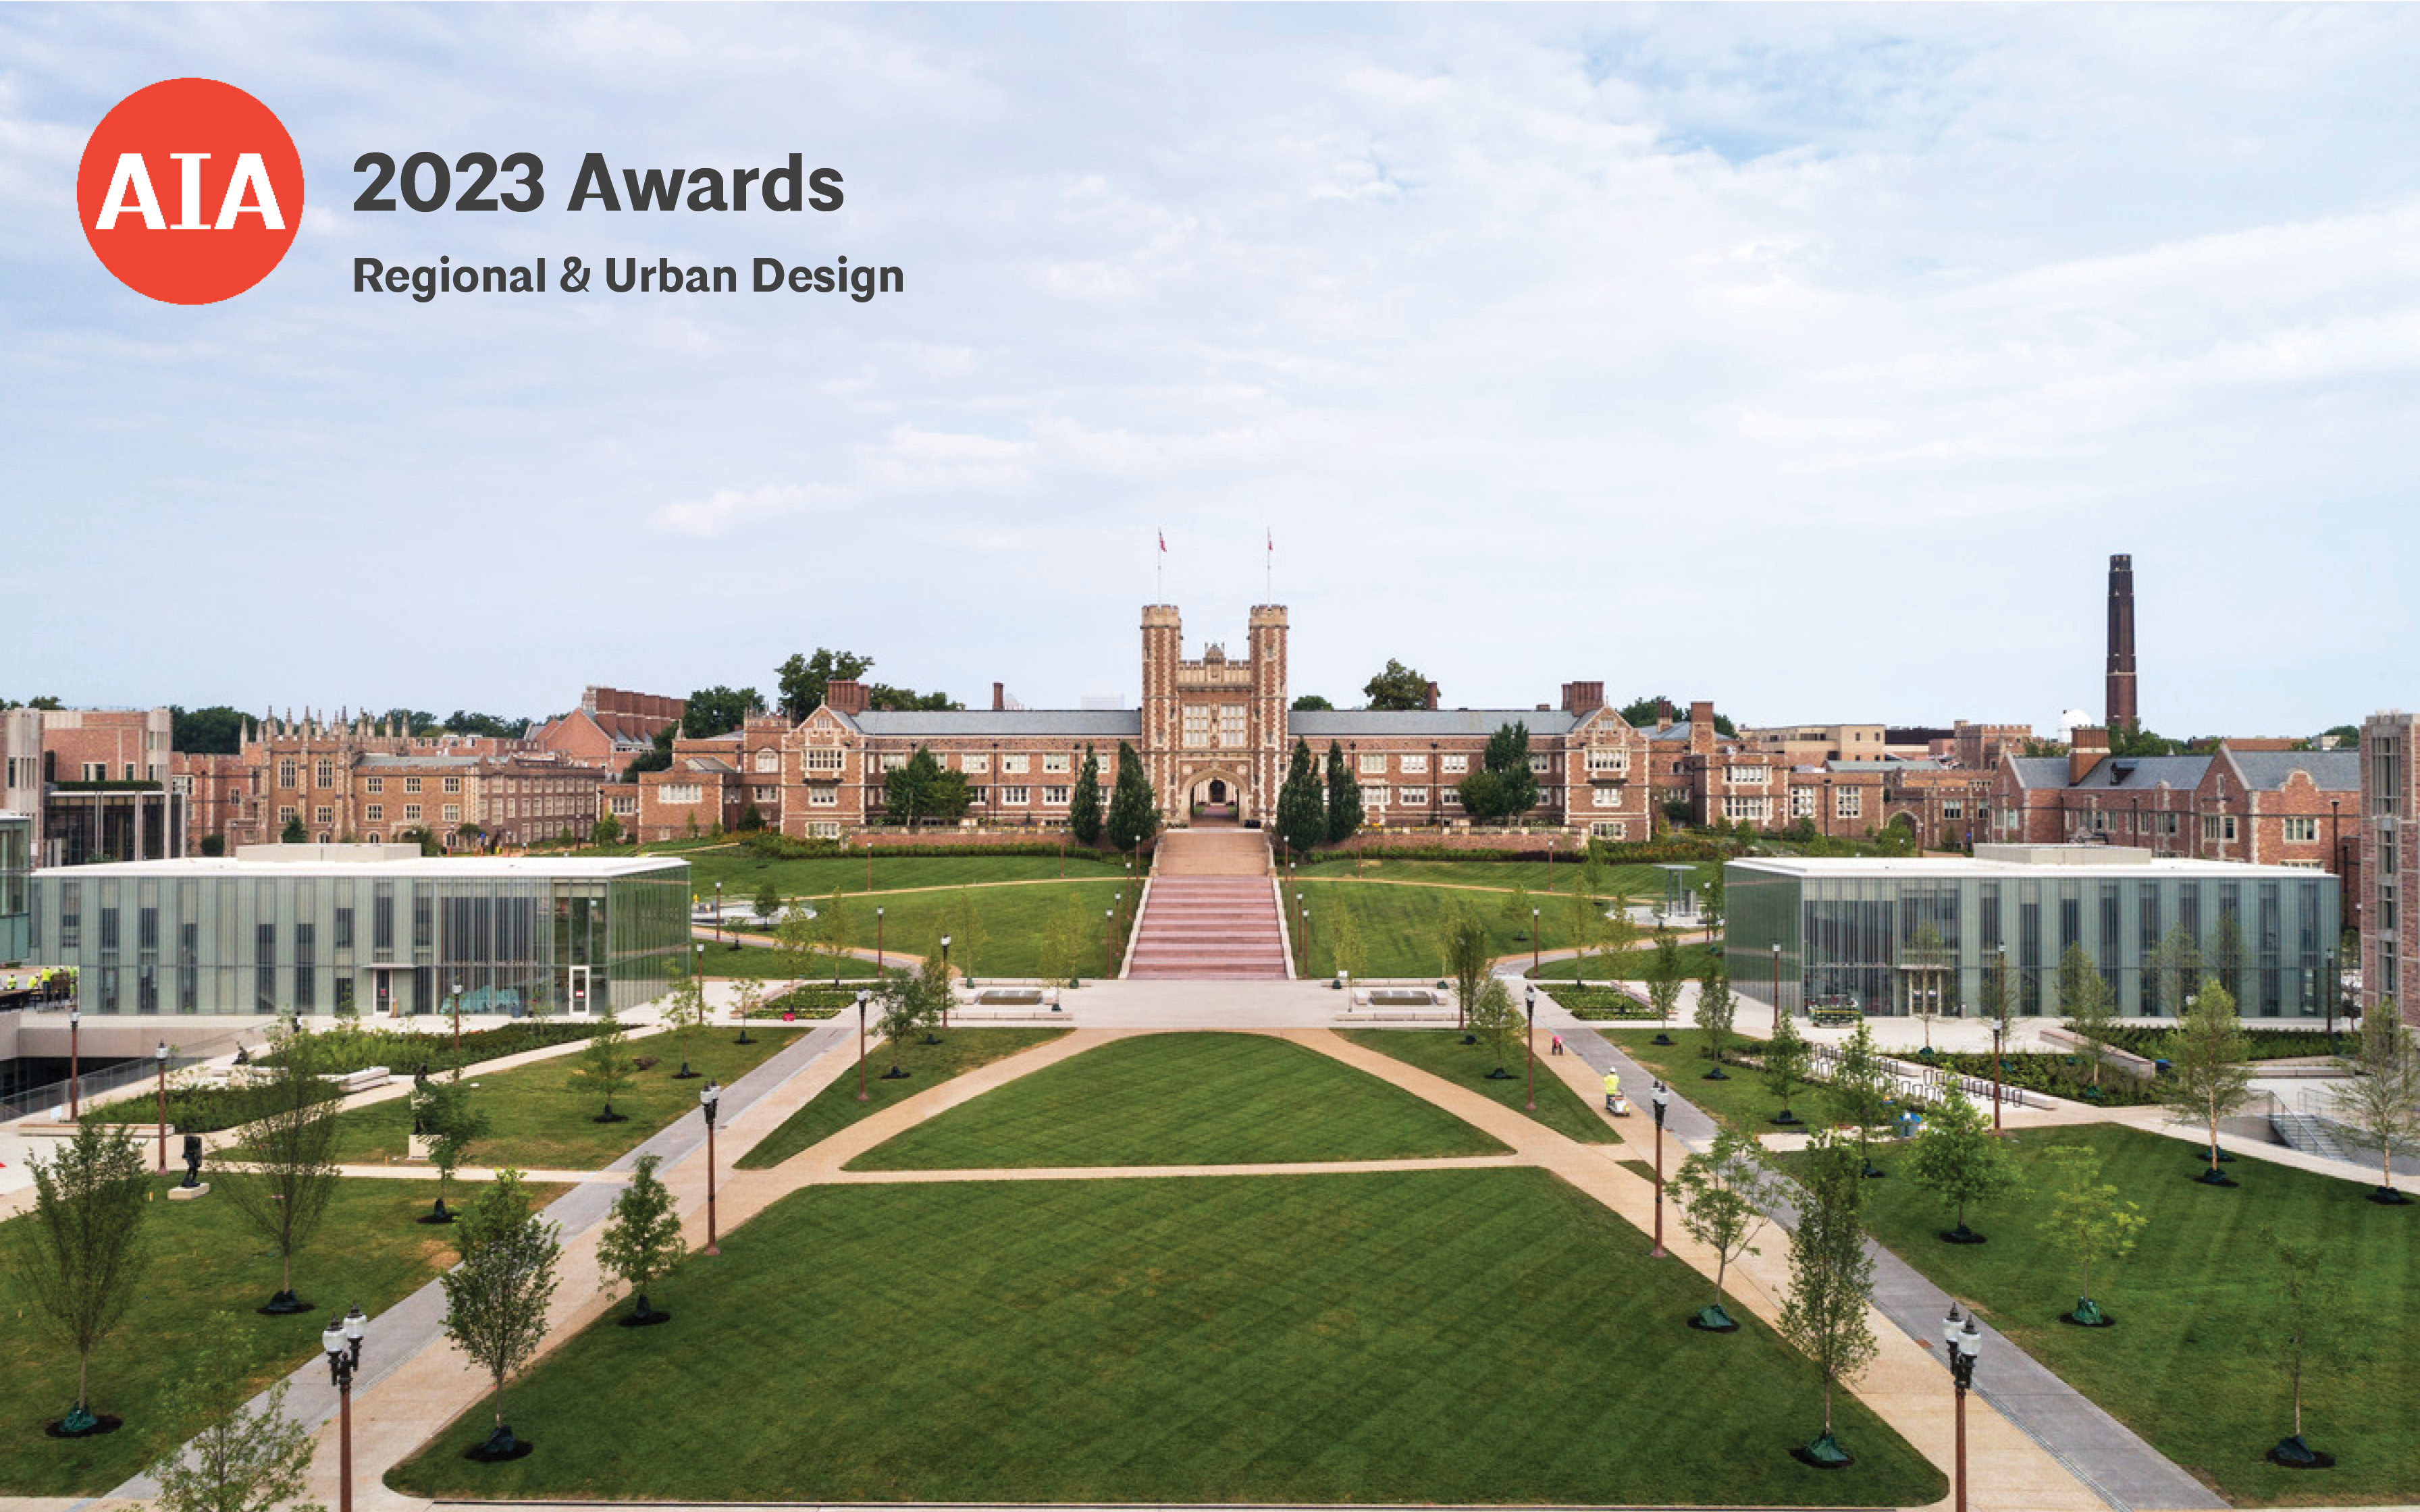 WashU East End Transformation Recognized by AIA for Excellence in Regional and Urban Design